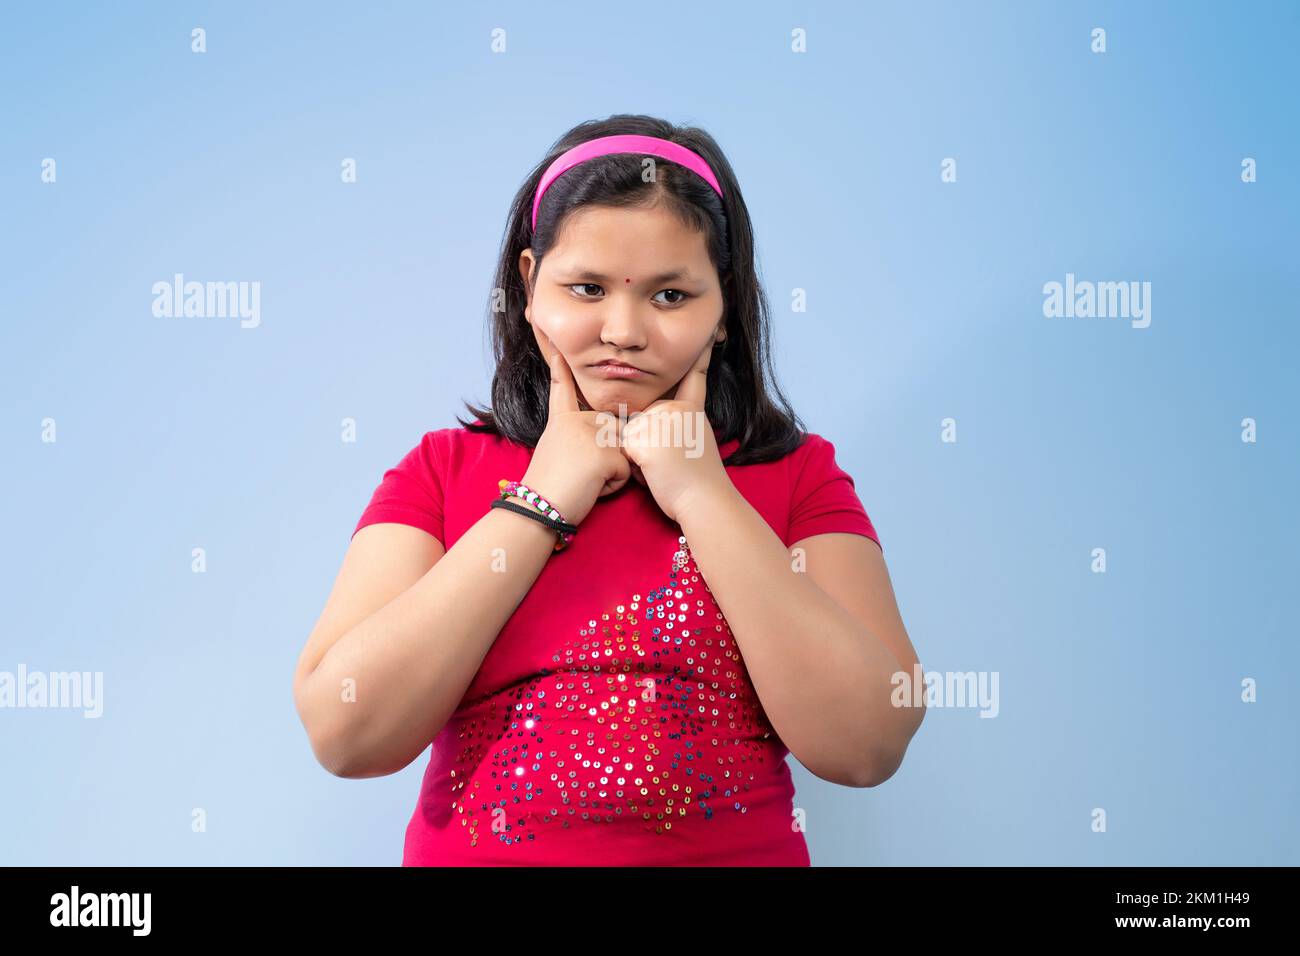 Girl cheeks pressing her fingers on her cheeks Stock Photo